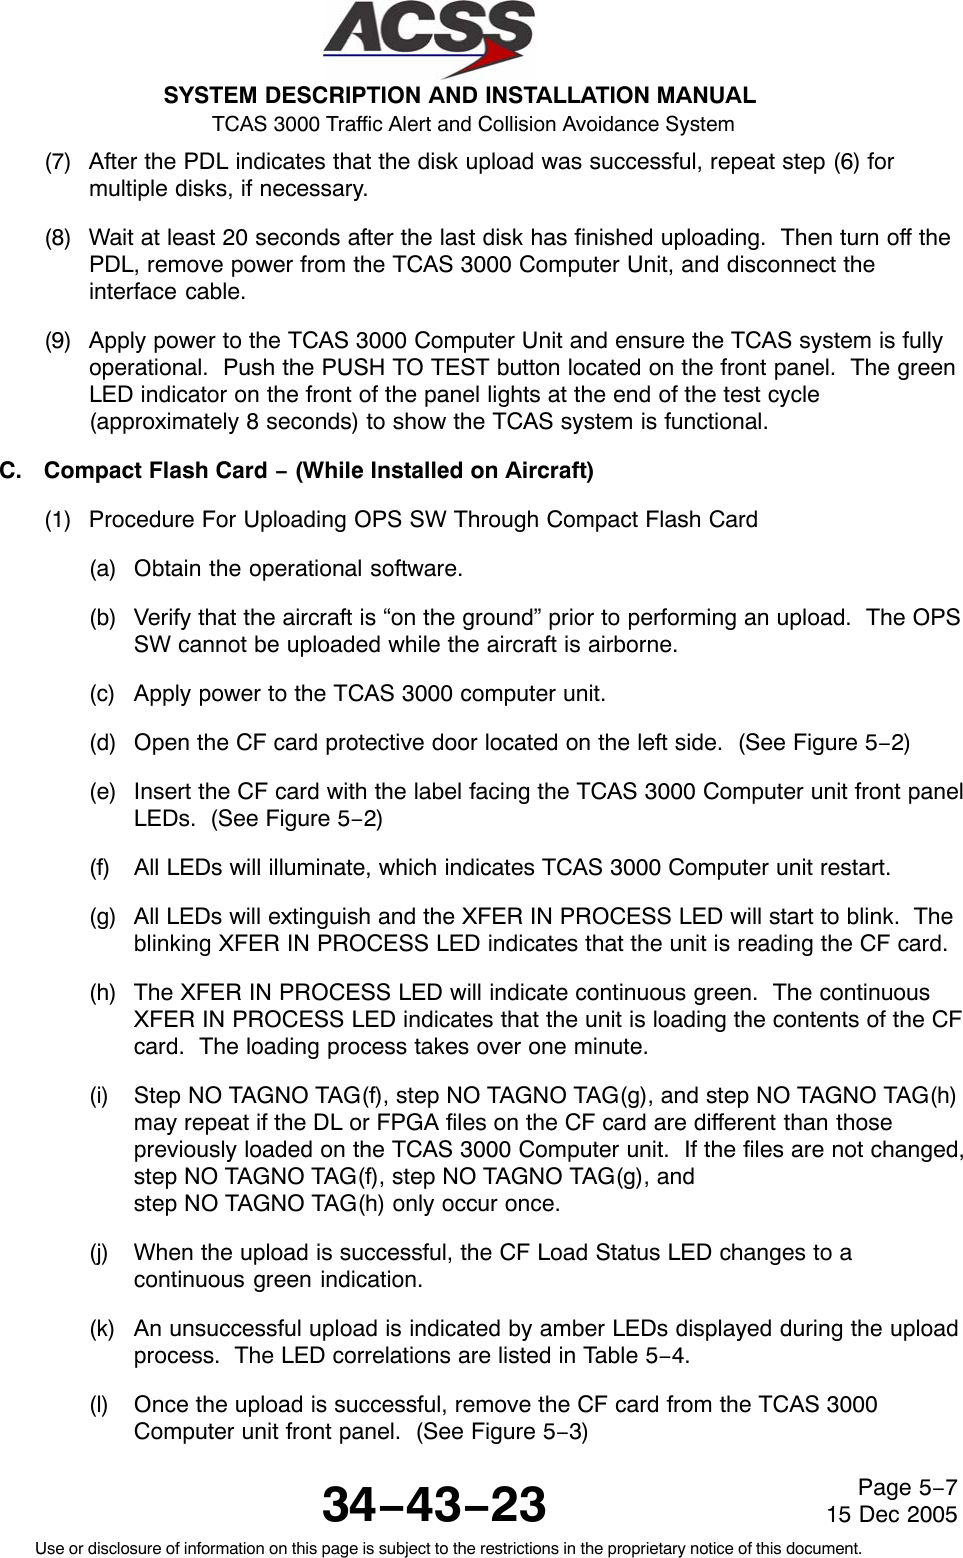 SYSTEM DESCRIPTION AND INSTALLATION MANUAL TCAS 3000 Traffic Alert and Collision Avoidance System34−43−23Use or disclosure of information on this page is subject to the restrictions in the proprietary notice of this document.Page 5−715 Dec 2005(7) After the PDL indicates that the disk upload was successful, repeat step (6) formultiple disks, if necessary.(8) Wait at least 20 seconds after the last disk has finished uploading.  Then turn off thePDL, remove power from the TCAS 3000 Computer Unit, and disconnect theinterface cable.(9) Apply power to the TCAS 3000 Computer Unit and ensure the TCAS system is fullyoperational.  Push the PUSH TO TEST button located on the front panel.  The greenLED indicator on the front of the panel lights at the end of the test cycle(approximately 8 seconds) to show the TCAS system is functional.C. Compact Flash Card − (While Installed on Aircraft)(1) Procedure For Uploading OPS SW Through Compact Flash Card(a) Obtain the operational software.(b) Verify that the aircraft is “on the ground” prior to performing an upload.  The OPSSW cannot be uploaded while the aircraft is airborne.(c) Apply power to the TCAS 3000 computer unit.(d) Open the CF card protective door located on the left side.  (See Figure 5−2)(e) Insert the CF card with the label facing the TCAS 3000 Computer unit front panelLEDs.  (See Figure 5−2)(f) All LEDs will illuminate, which indicates TCAS 3000 Computer unit restart.(g) All LEDs will extinguish and the XFER IN PROCESS LED will start to blink.  Theblinking XFER IN PROCESS LED indicates that the unit is reading the CF card.(h) The XFER IN PROCESS LED will indicate continuous green.  The continuousXFER IN PROCESS LED indicates that the unit is loading the contents of the CFcard.  The loading process takes over one minute.(i) Step NO TAGNO TAG(f), step NO TAGNO TAG(g), and step NO TAGNO TAG(h)may repeat if the DL or FPGA files on the CF card are different than thosepreviously loaded on the TCAS 3000 Computer unit.  If the files are not changed,step NO TAGNO TAG(f), step NO TAGNO TAG(g), and step NO TAGNO TAG(h) only occur once.(j) When the upload is successful, the CF Load Status LED changes to acontinuous green indication.(k) An unsuccessful upload is indicated by amber LEDs displayed during the uploadprocess.  The LED correlations are listed in Table 5−4.(l) Once the upload is successful, remove the CF card from the TCAS 3000Computer unit front panel.  (See Figure 5−3)